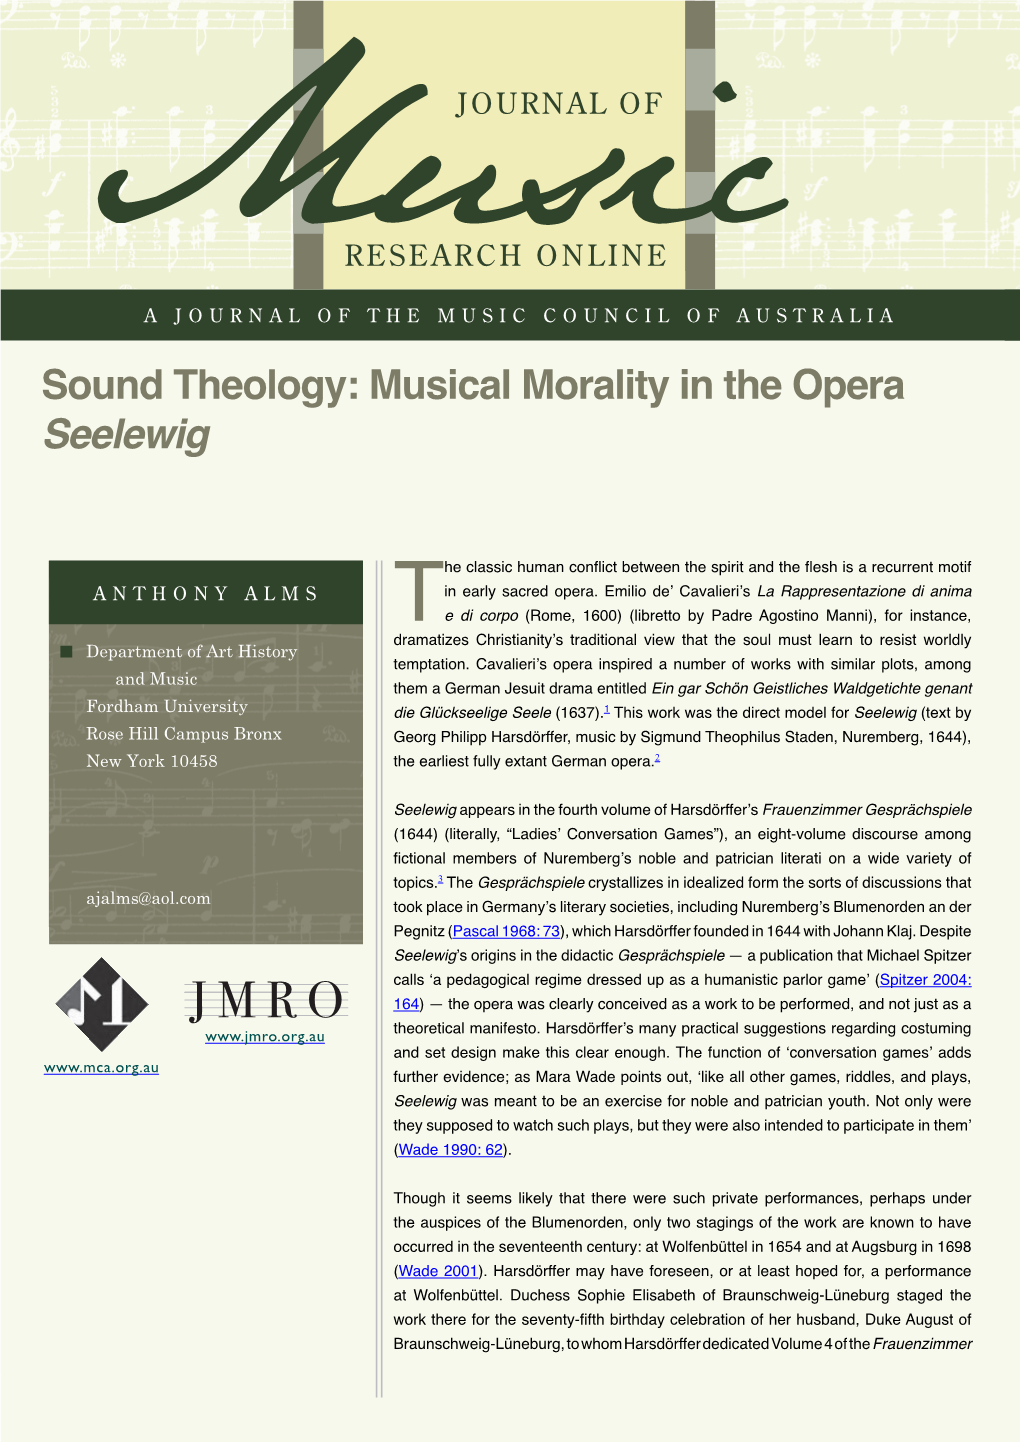 Sound Theology: Musical Morality in the Opera Seelewig DRAFT